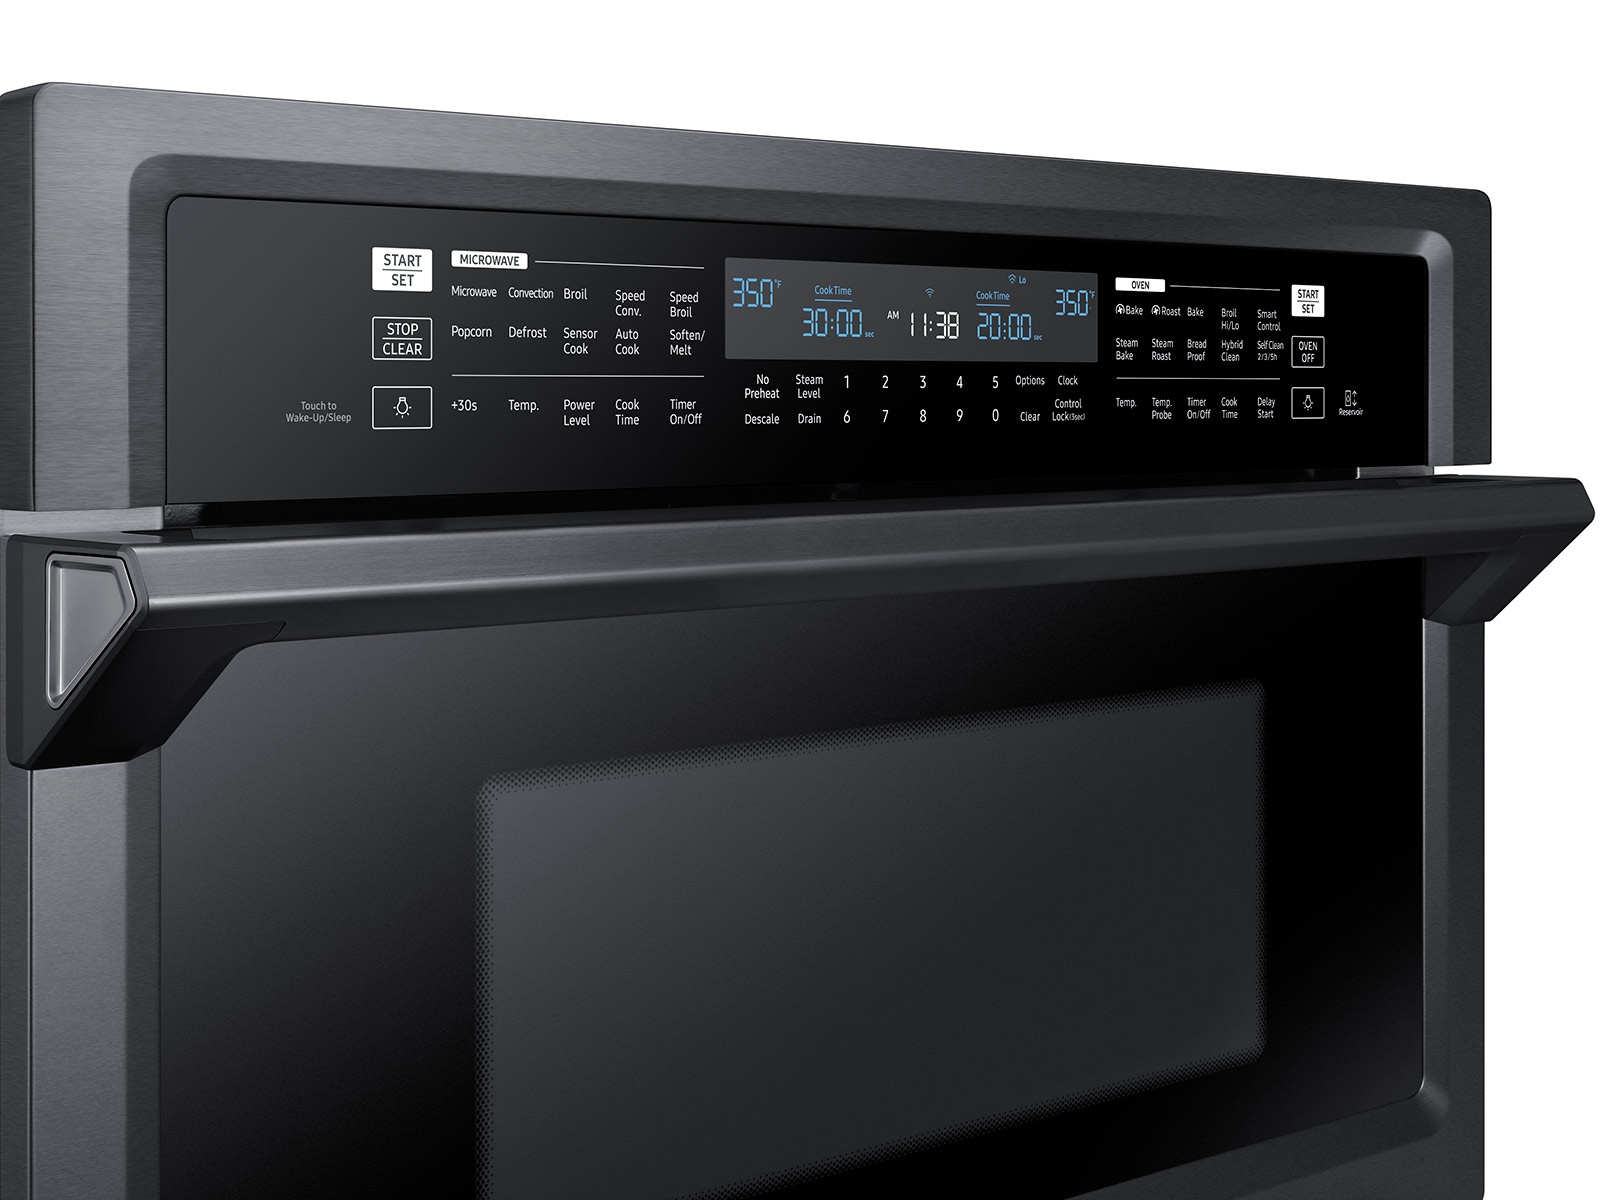 Samsung 30 Microwave Combination Wall Oven with Steam Cook and WiFi Black  Stainless Steel NQ70M6650DG - Best Buy